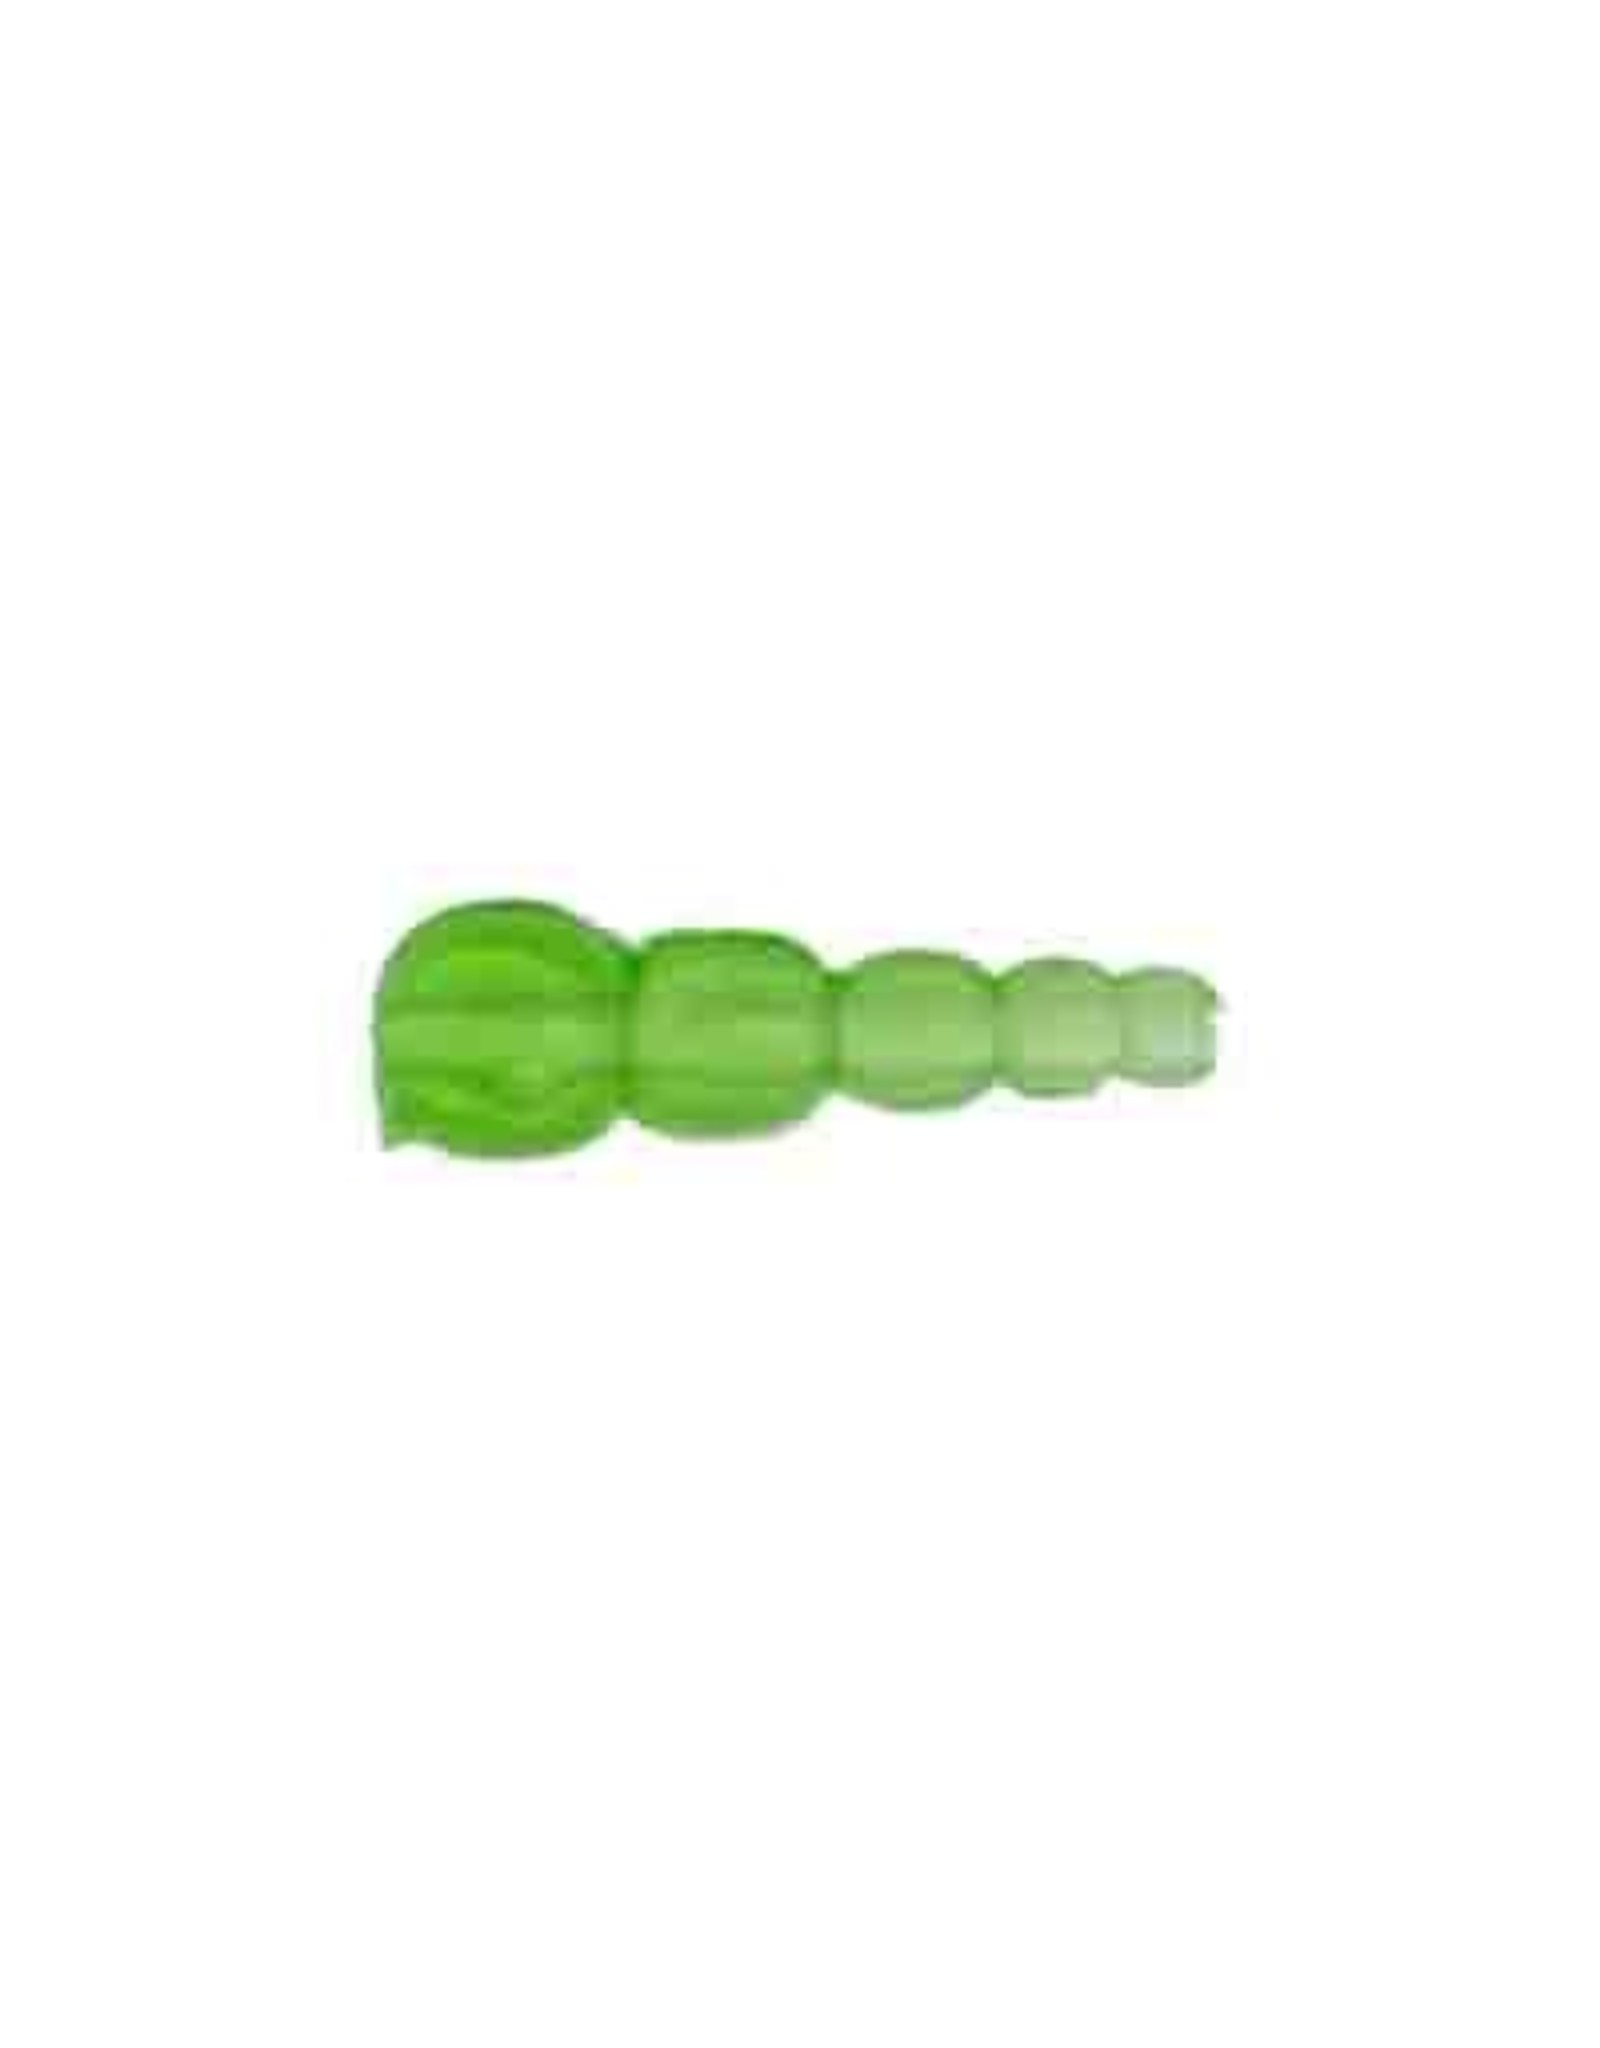 Stacking  20mm Long  approx 6-2mm  Transparent Neon Green  x25